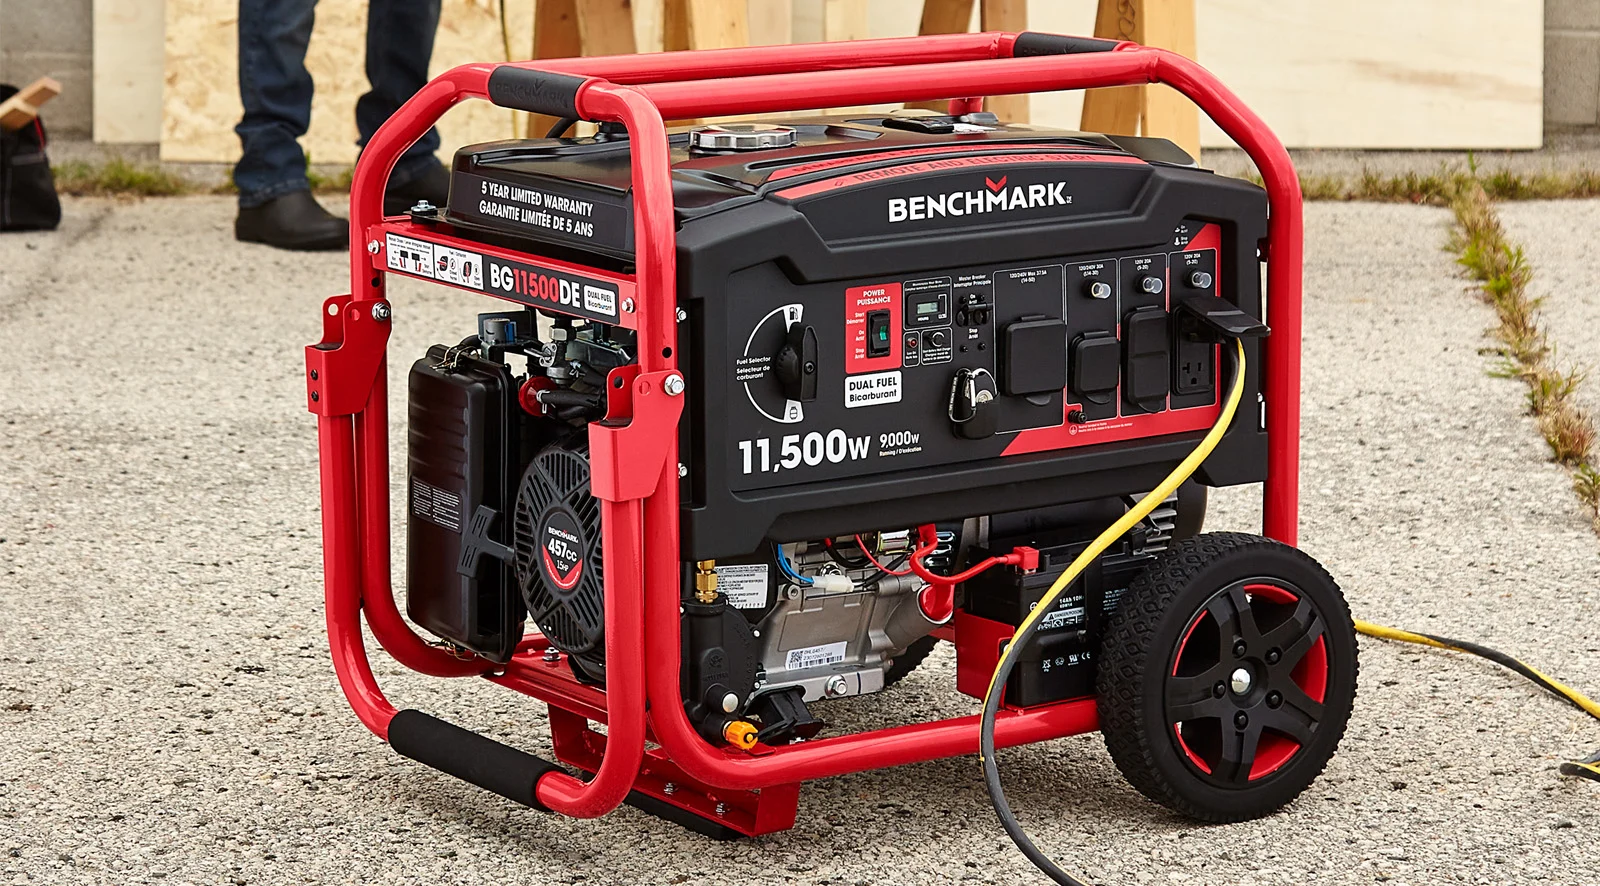 5210237 BENCHMARK Portable Dual Fuel Generator - with Remote Start, 11500W 76-80dB Lifestyle Photo Detail 1